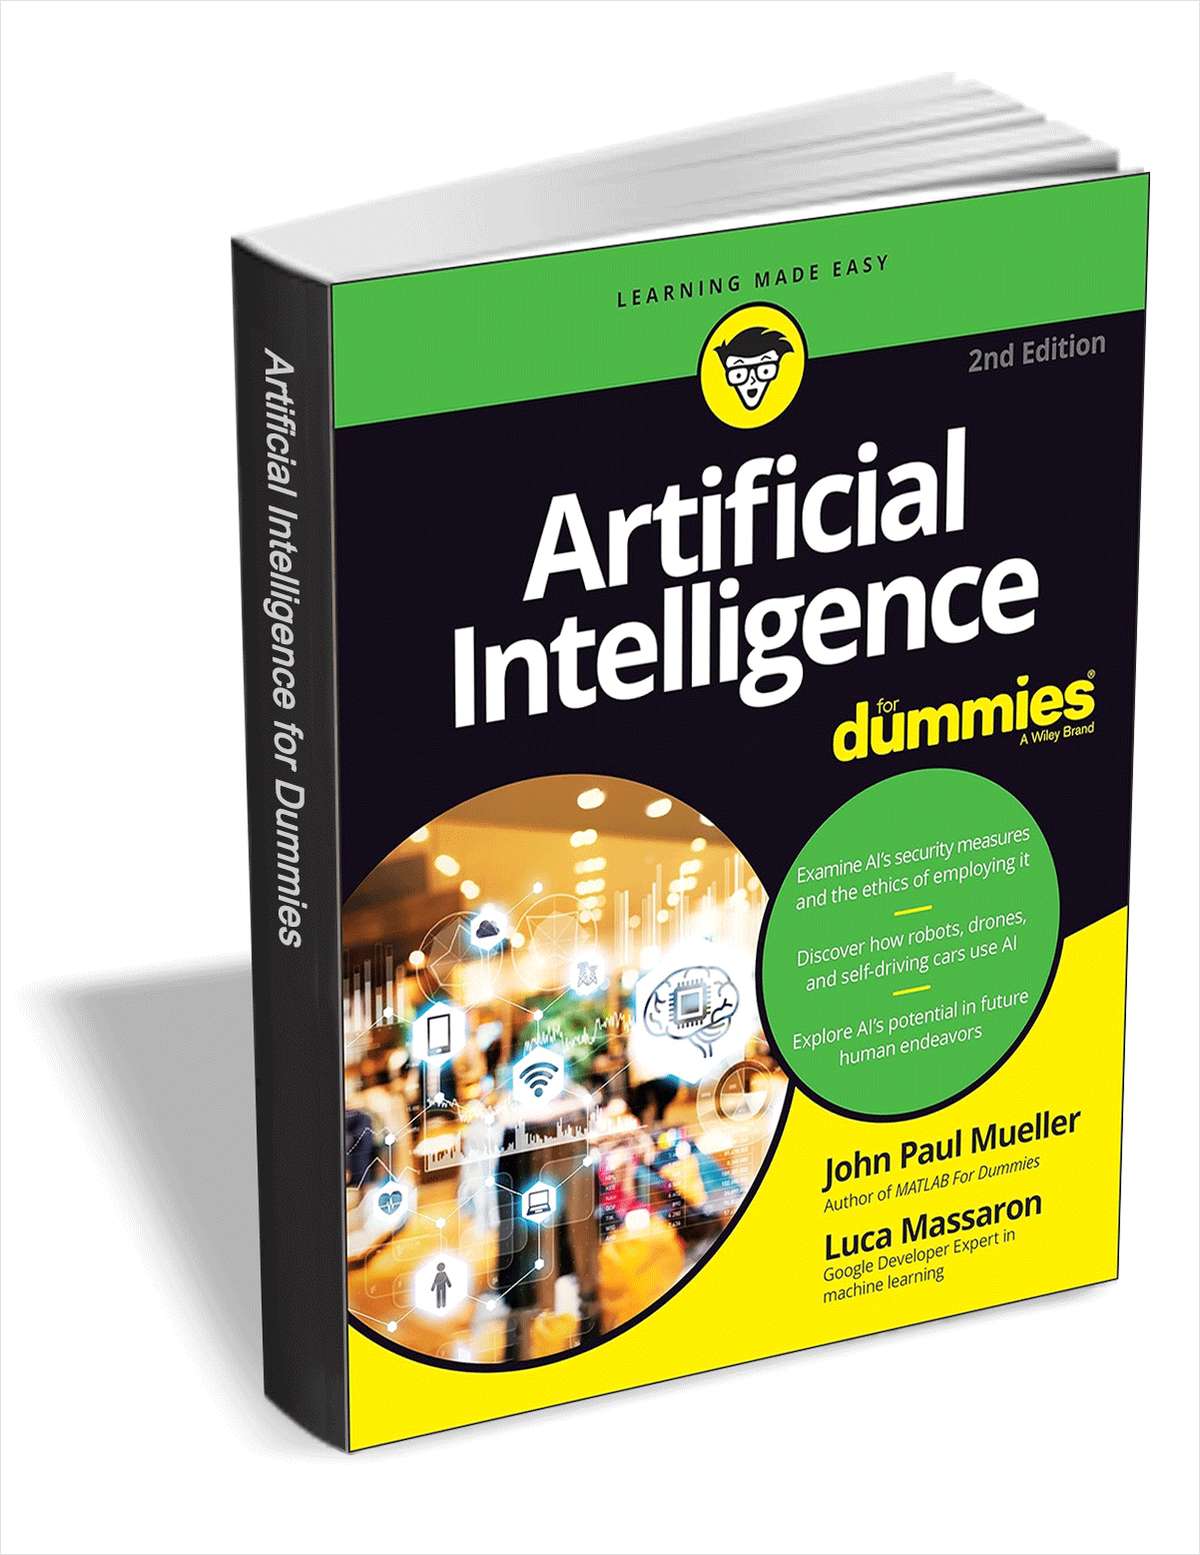 Artificial Intelligence For Dummies, 2nd Edition ($22.00 Value) FREE for a Limited Time